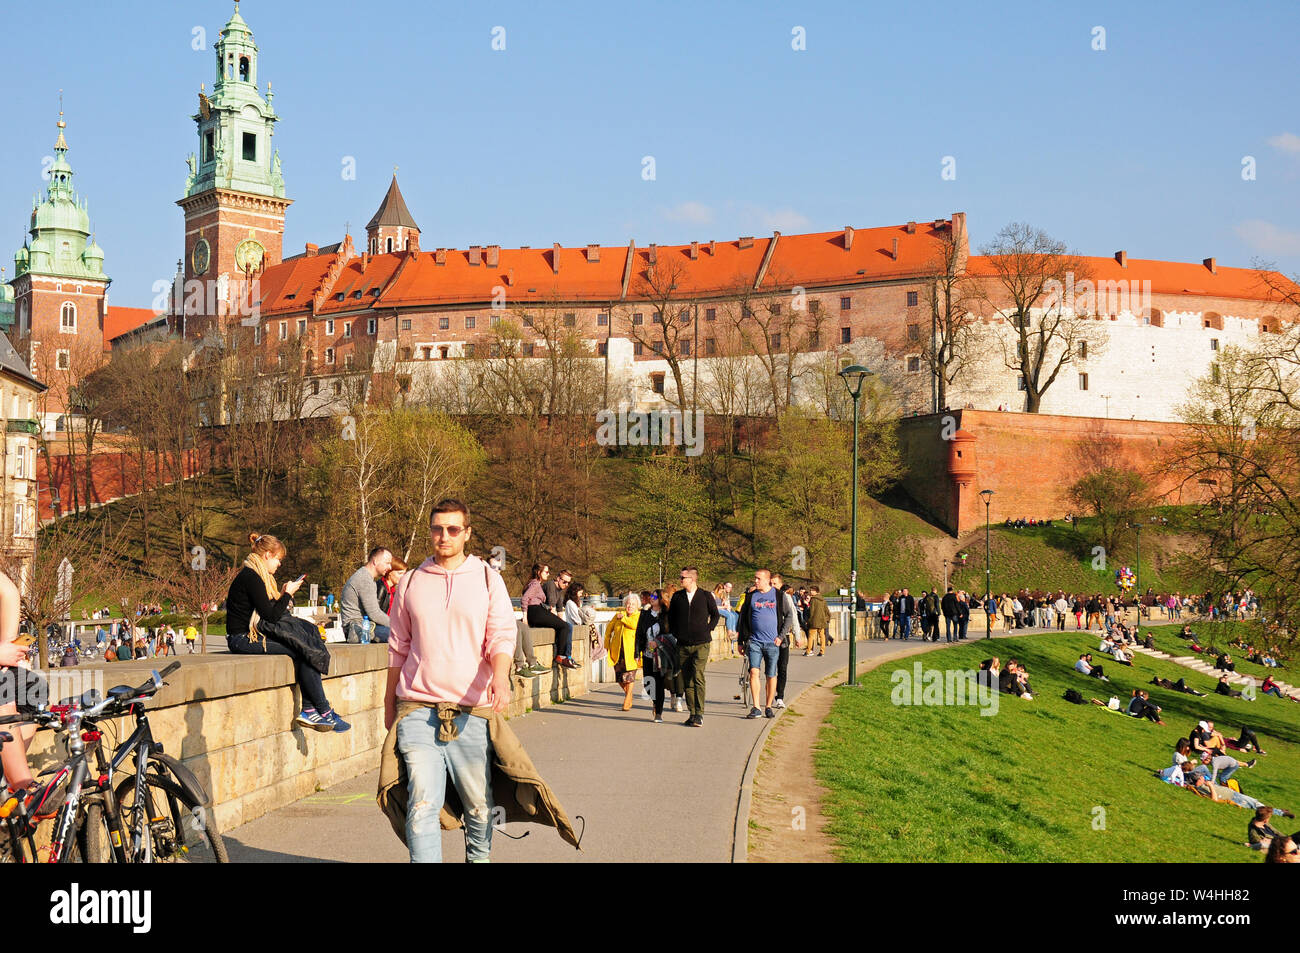 Sunday afternoon leisure.  Early Spring.  By the Royal Wawel Castle, and banks of River Vistula, Krakow, Little Poland. Stock Photo